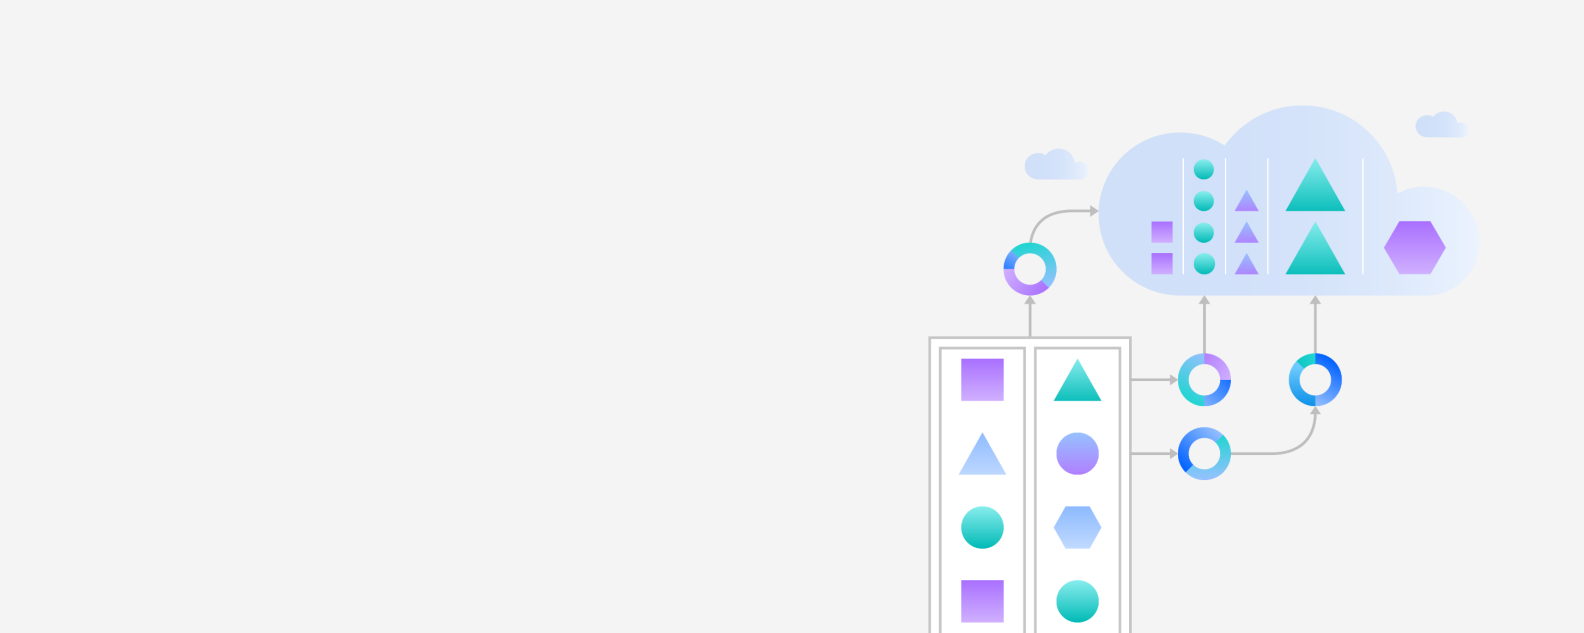 Illustration of a workflow with icons on cloud